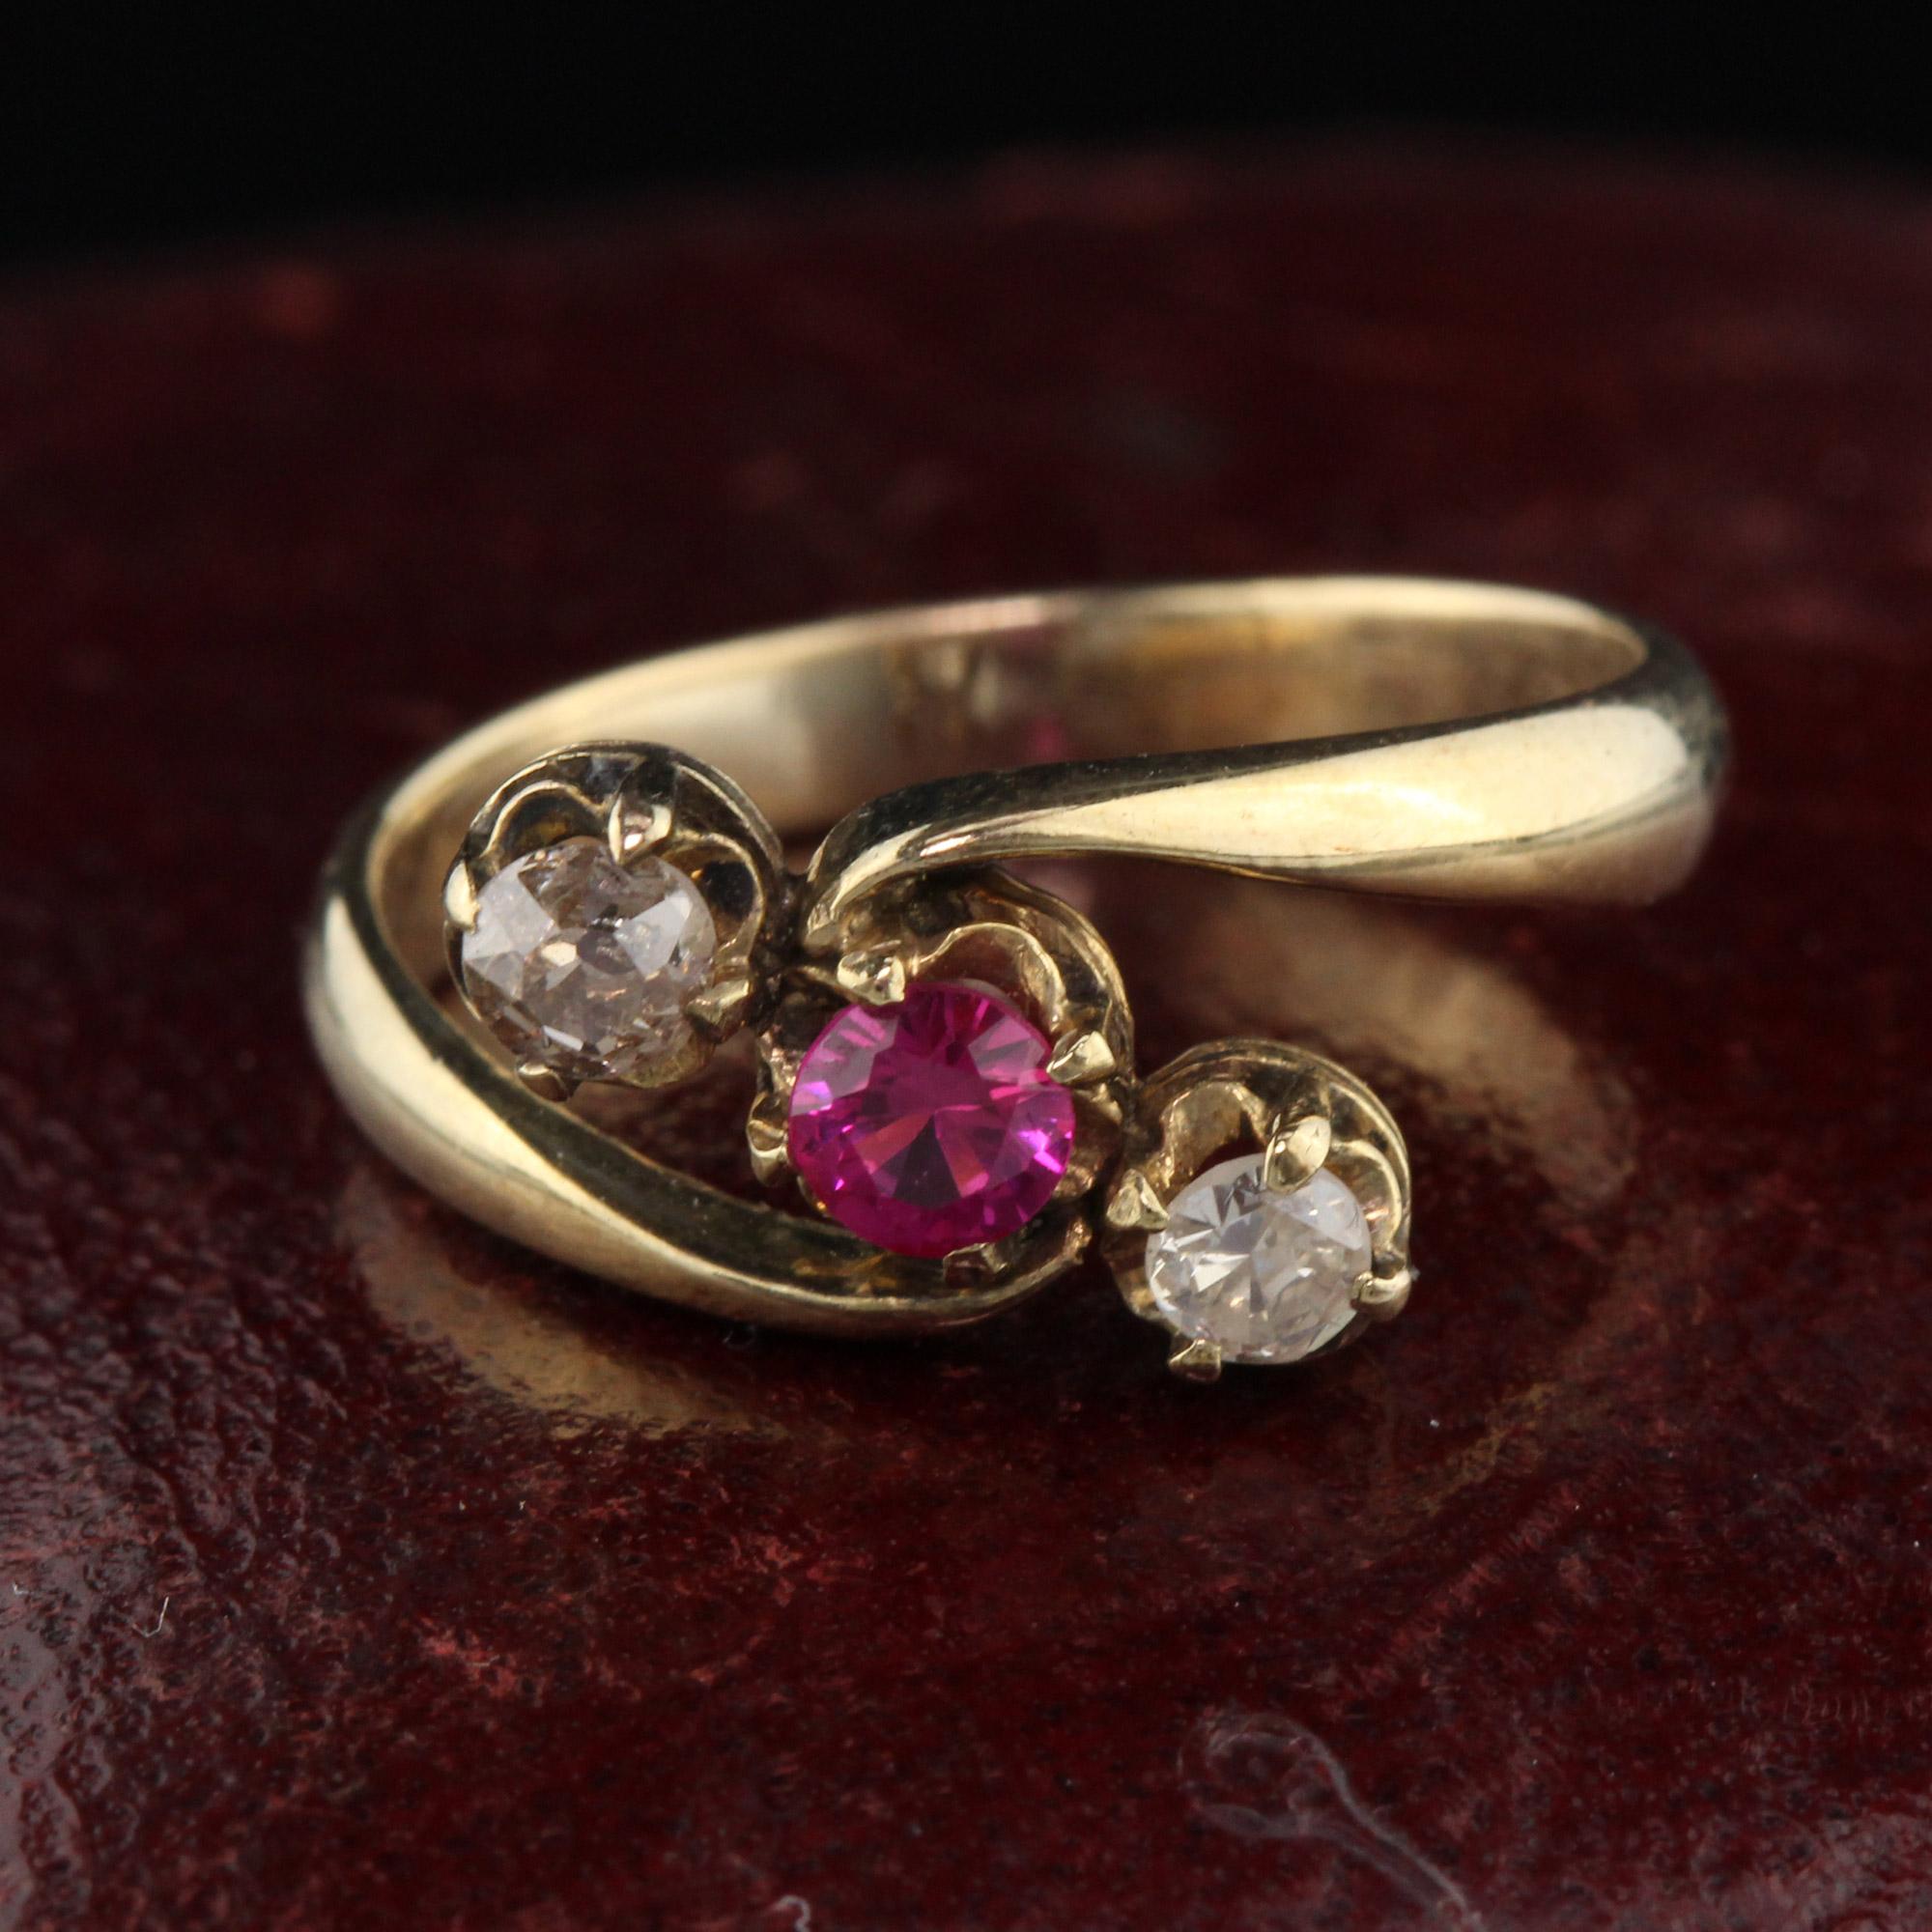 Victorian Yellow Gold three stone ring with synthetic ruby center and old cut diamonds on either side. A charming alternative engagement ring, every day ring, or pinky ring.

Metal: 14K Yellow Gold 

Weight: 2.0 Grams

Ring Size: 5

This ring can be